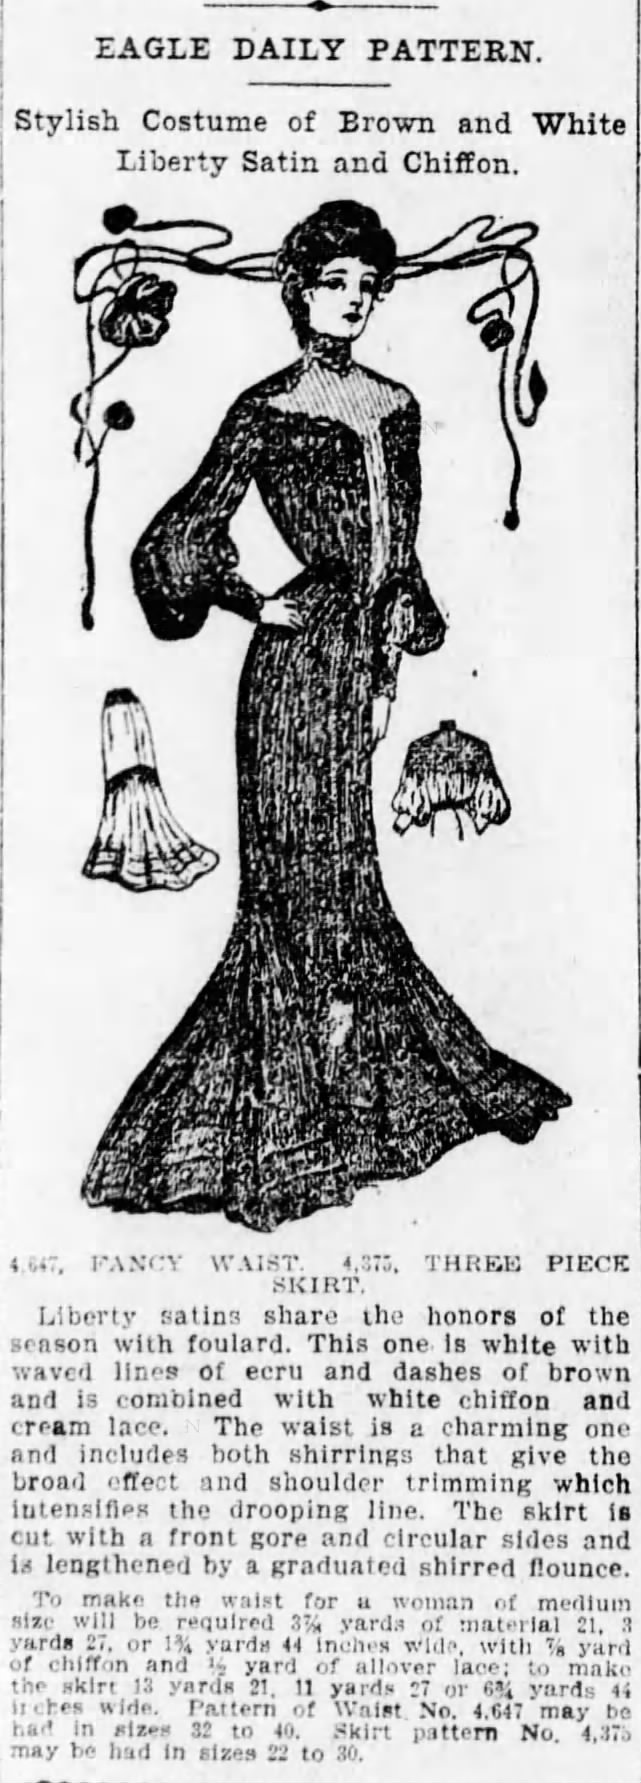 From The Brooklyn Daily Eagle, 5 March 1904